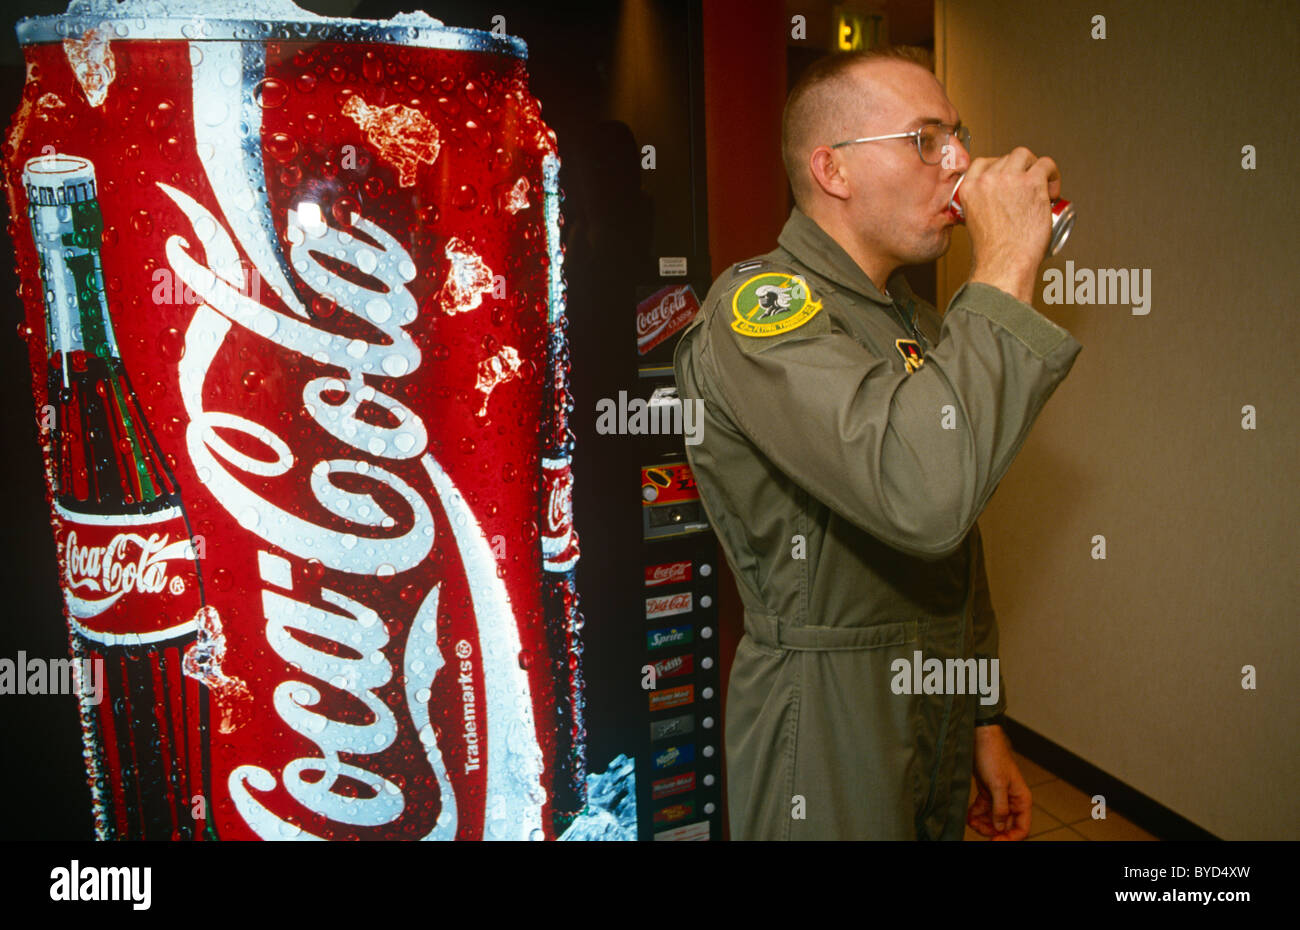 A United States Air Force pilot attending an escape and evasion course at Fairchild AFB, sips from a Coke can. Stock Photo